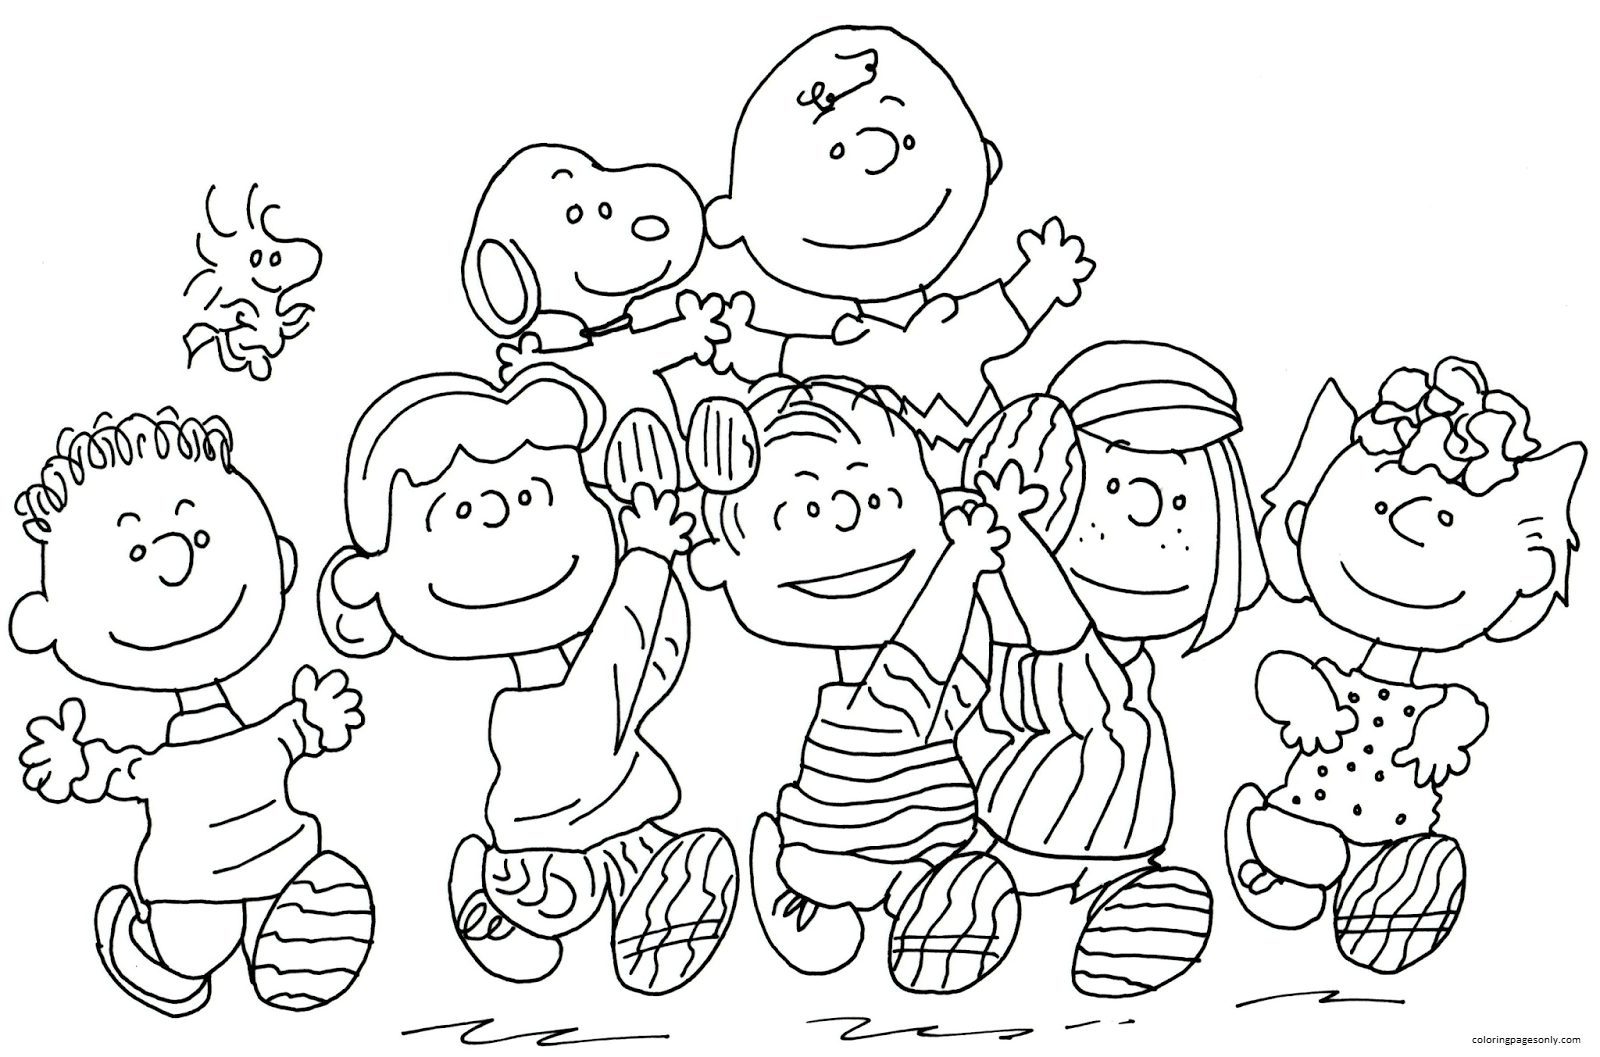 Charlie Brown Snoopy And Peanuts Coloring Pages